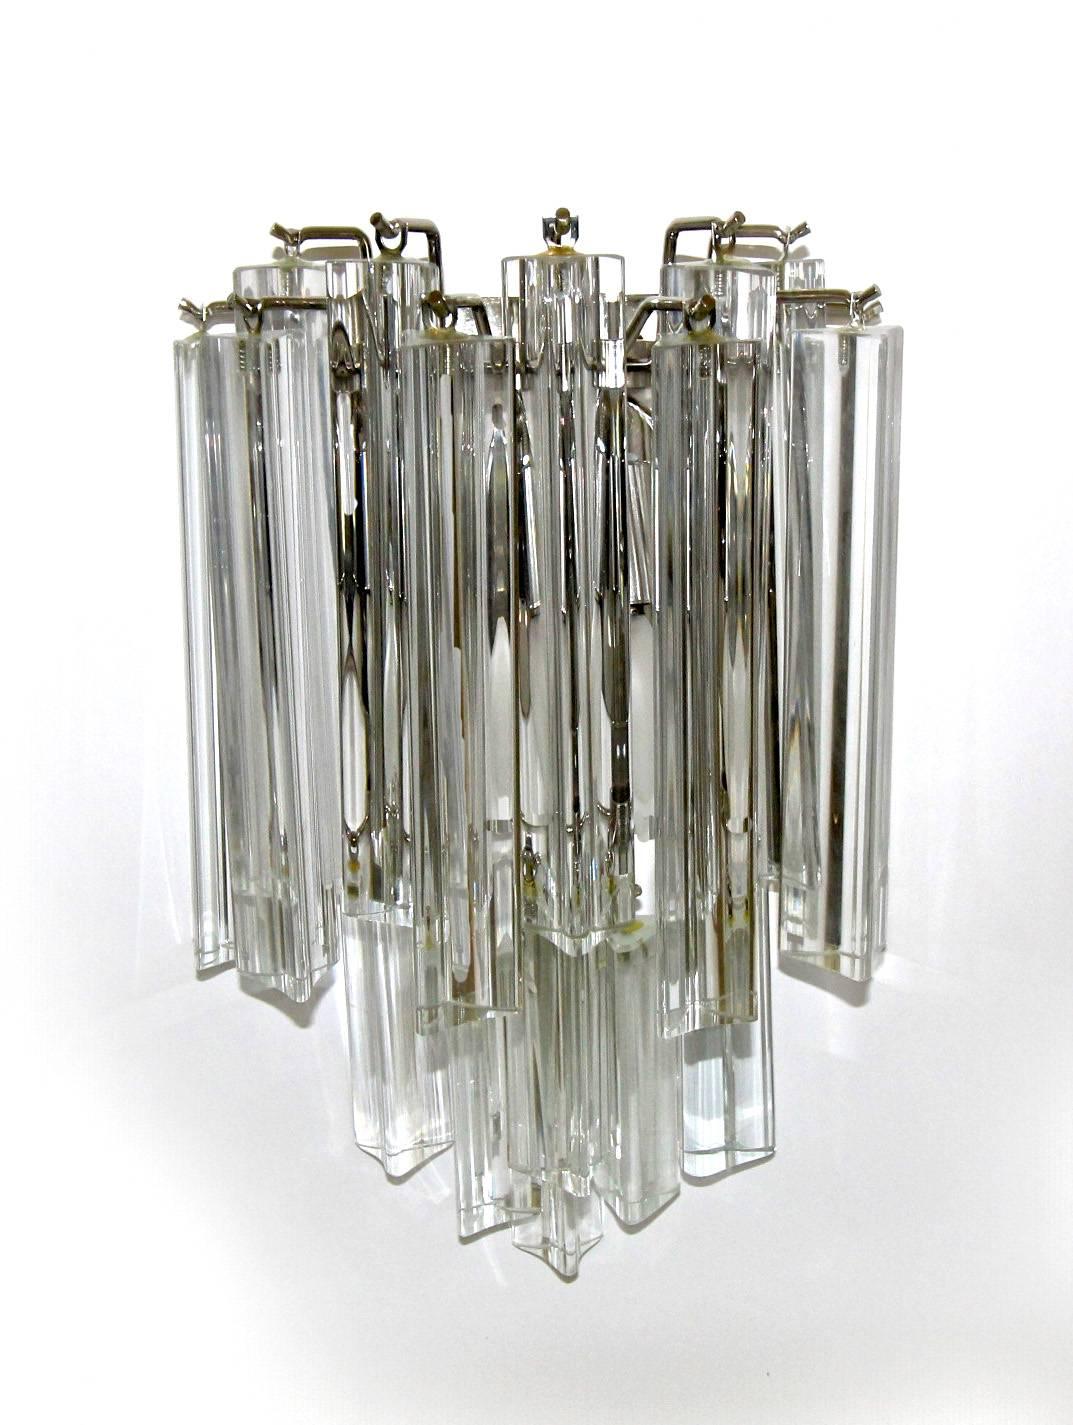 Pair of Venini for Camer glass clear crystal glass Triedri prism wall sconces with chrome-plated back plates. Each sconce uses two candelabra base bulbs. Newly wired. (2nd set available under separate listing.).